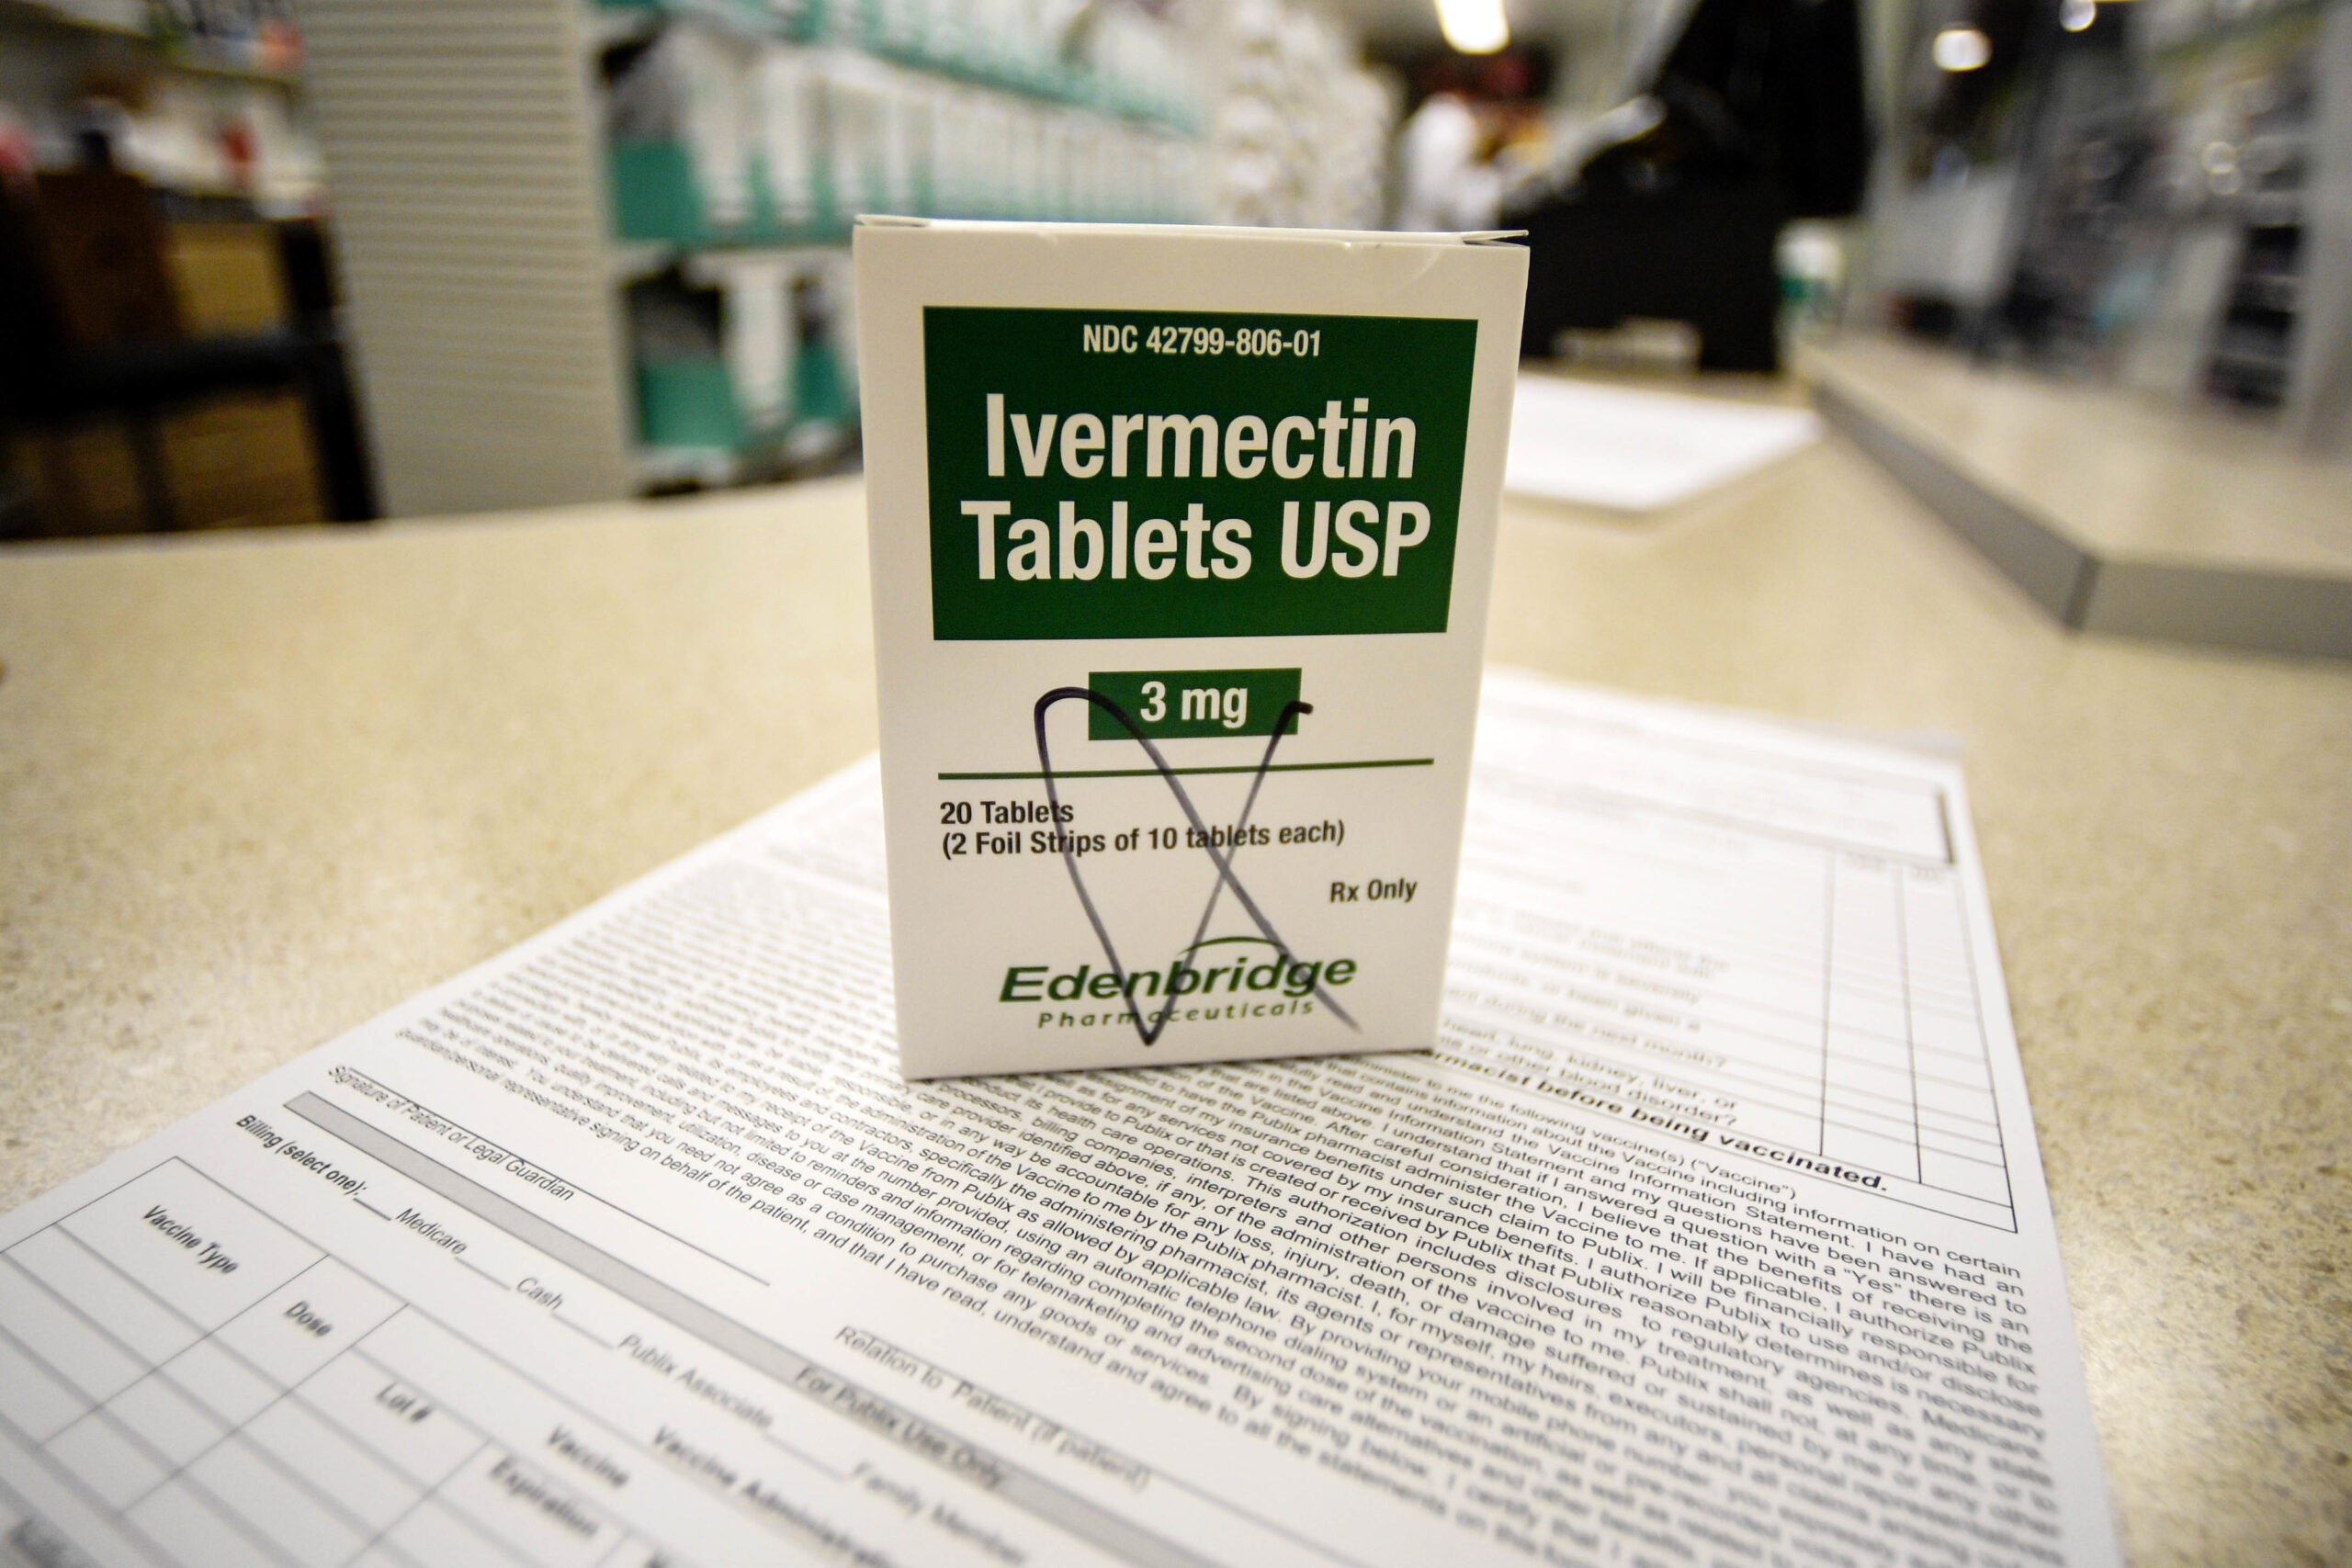 A box of ivermectin is shown in a pharmacy